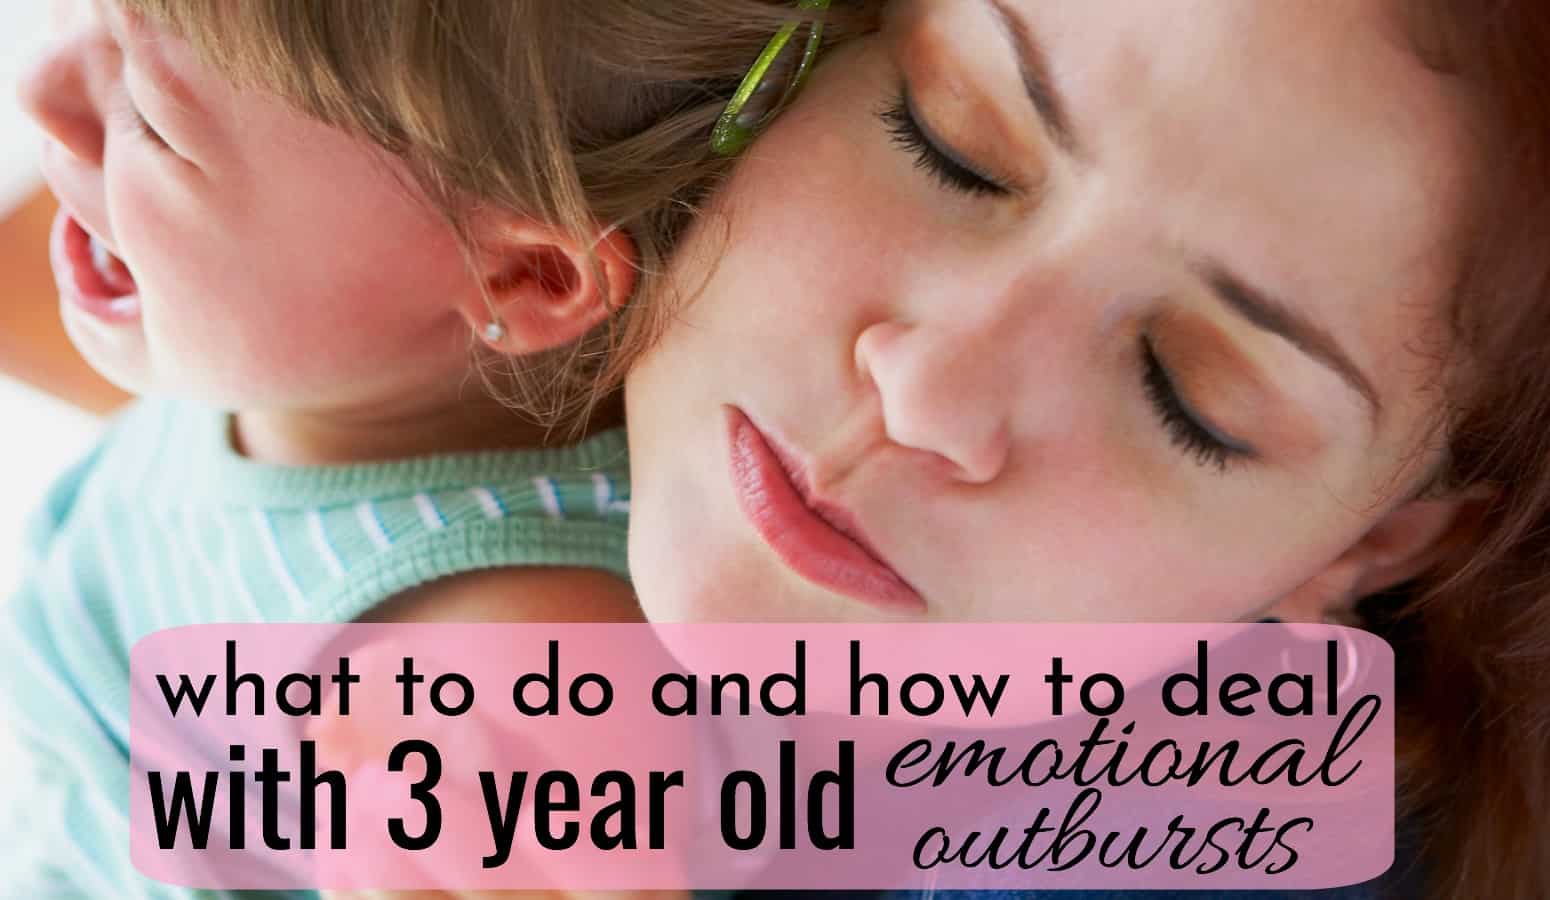 3 Year Old Emotional Outbursts What to do and how to